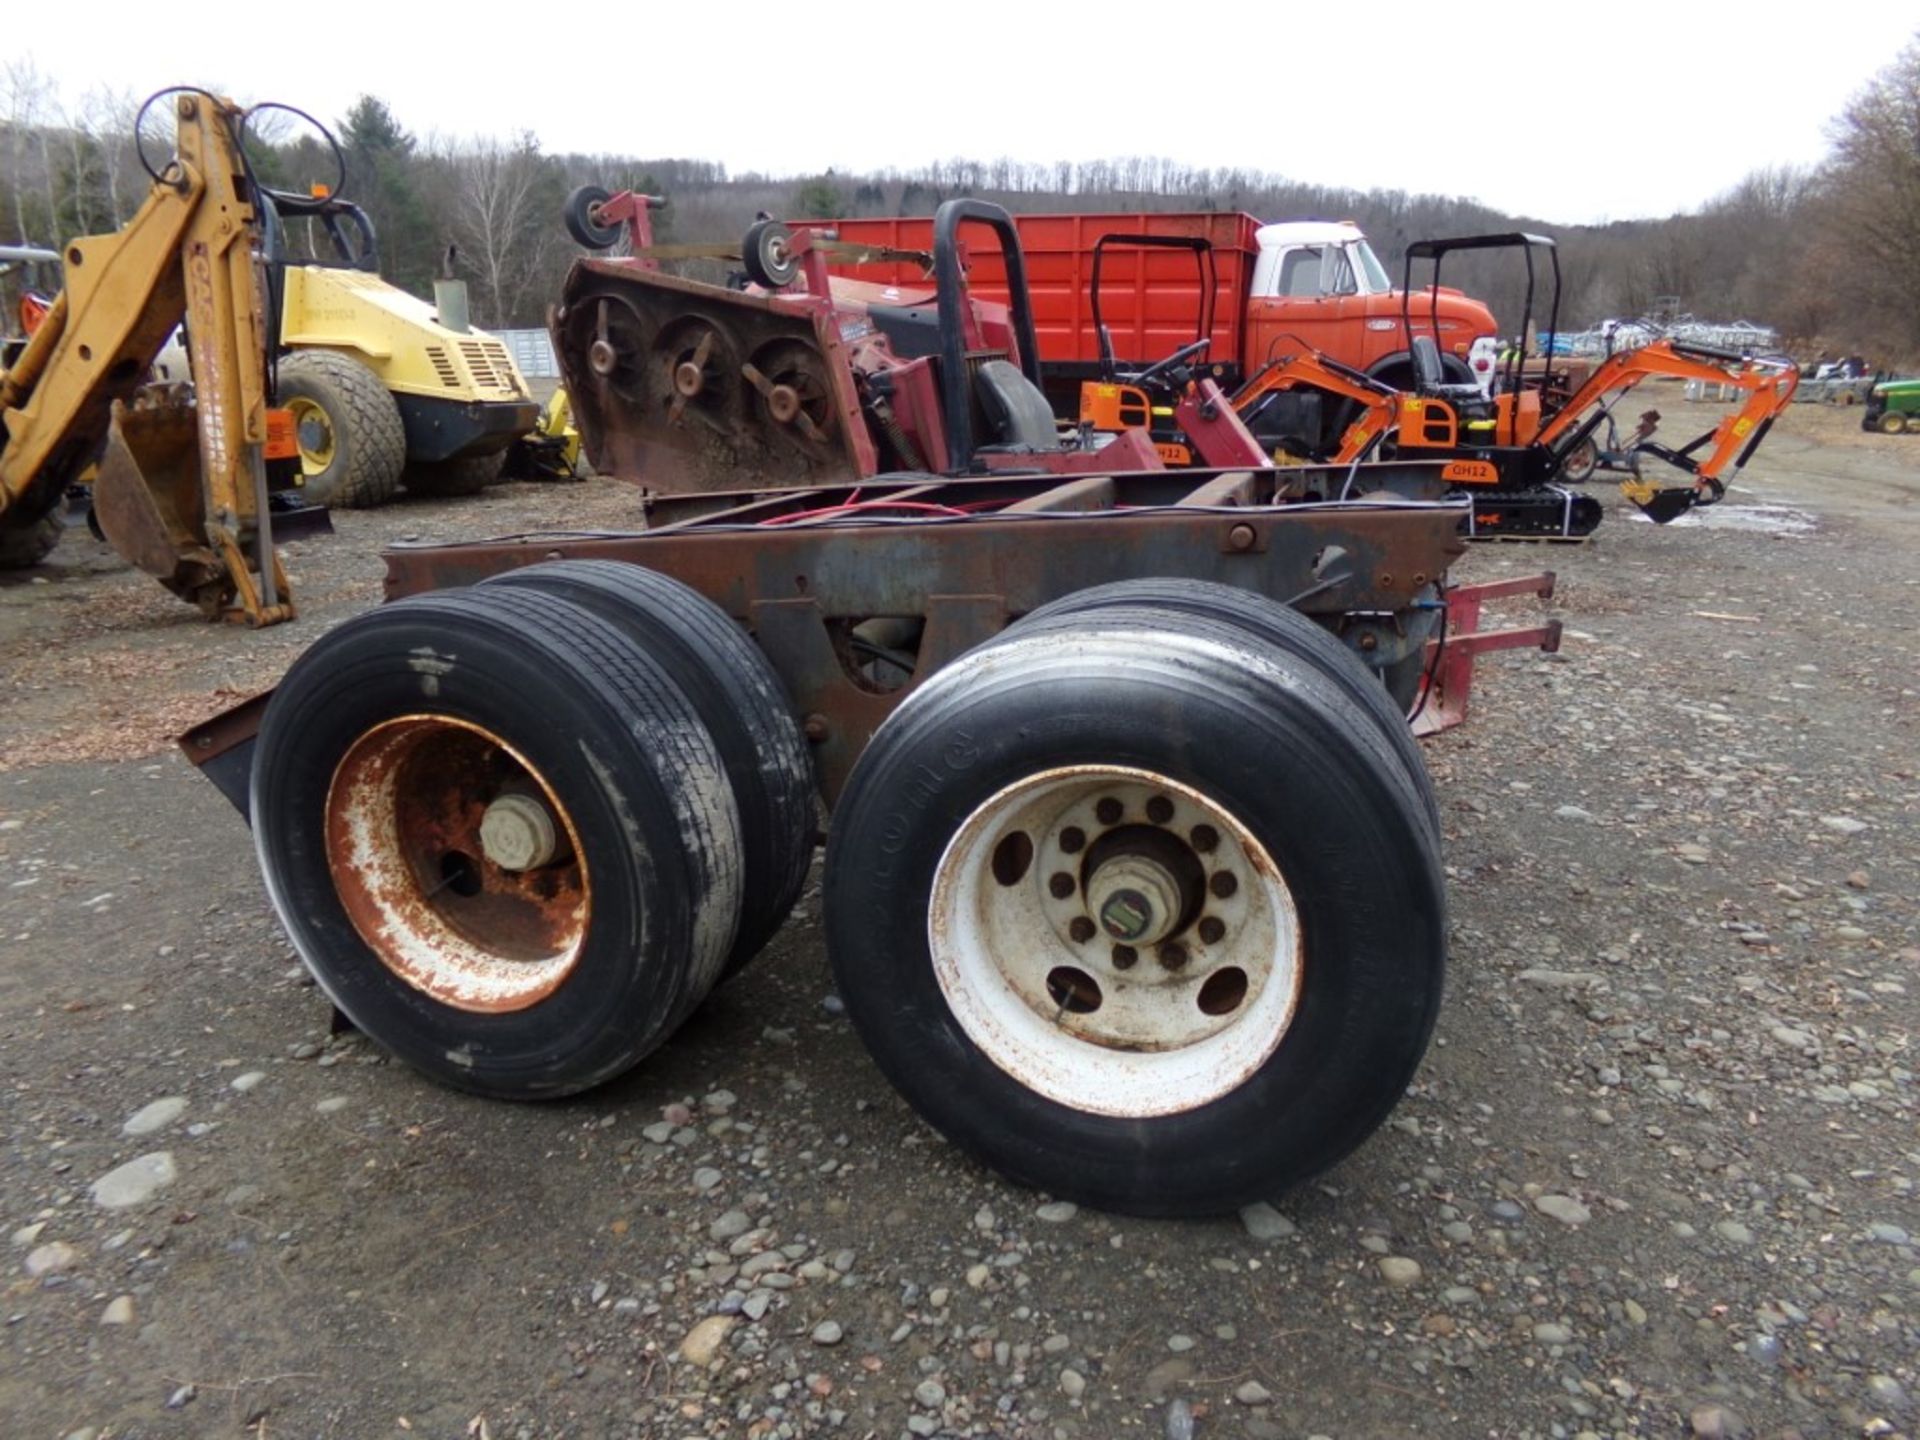 Tandem Axle Truck or Trailer Frame Sctio wih (7) 295/75R27.5 Tires on Rims,''Strick Corp'', Vin #